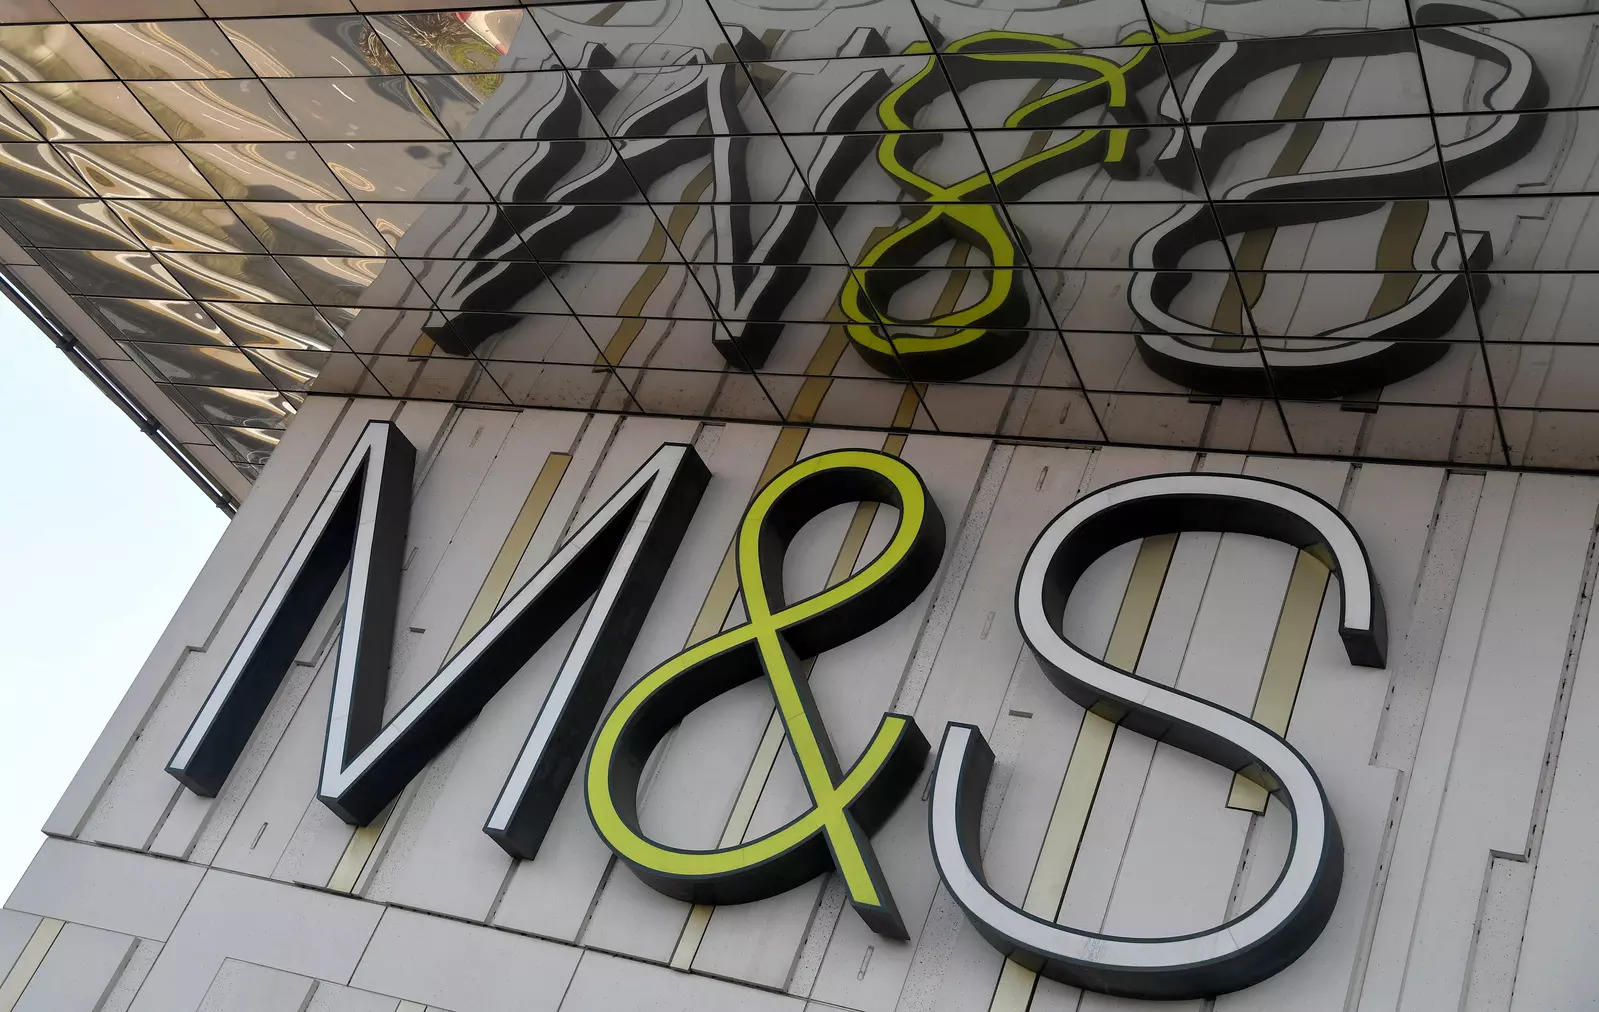 Britain's M&S lifts store worker pay by 7% citing rising living costs